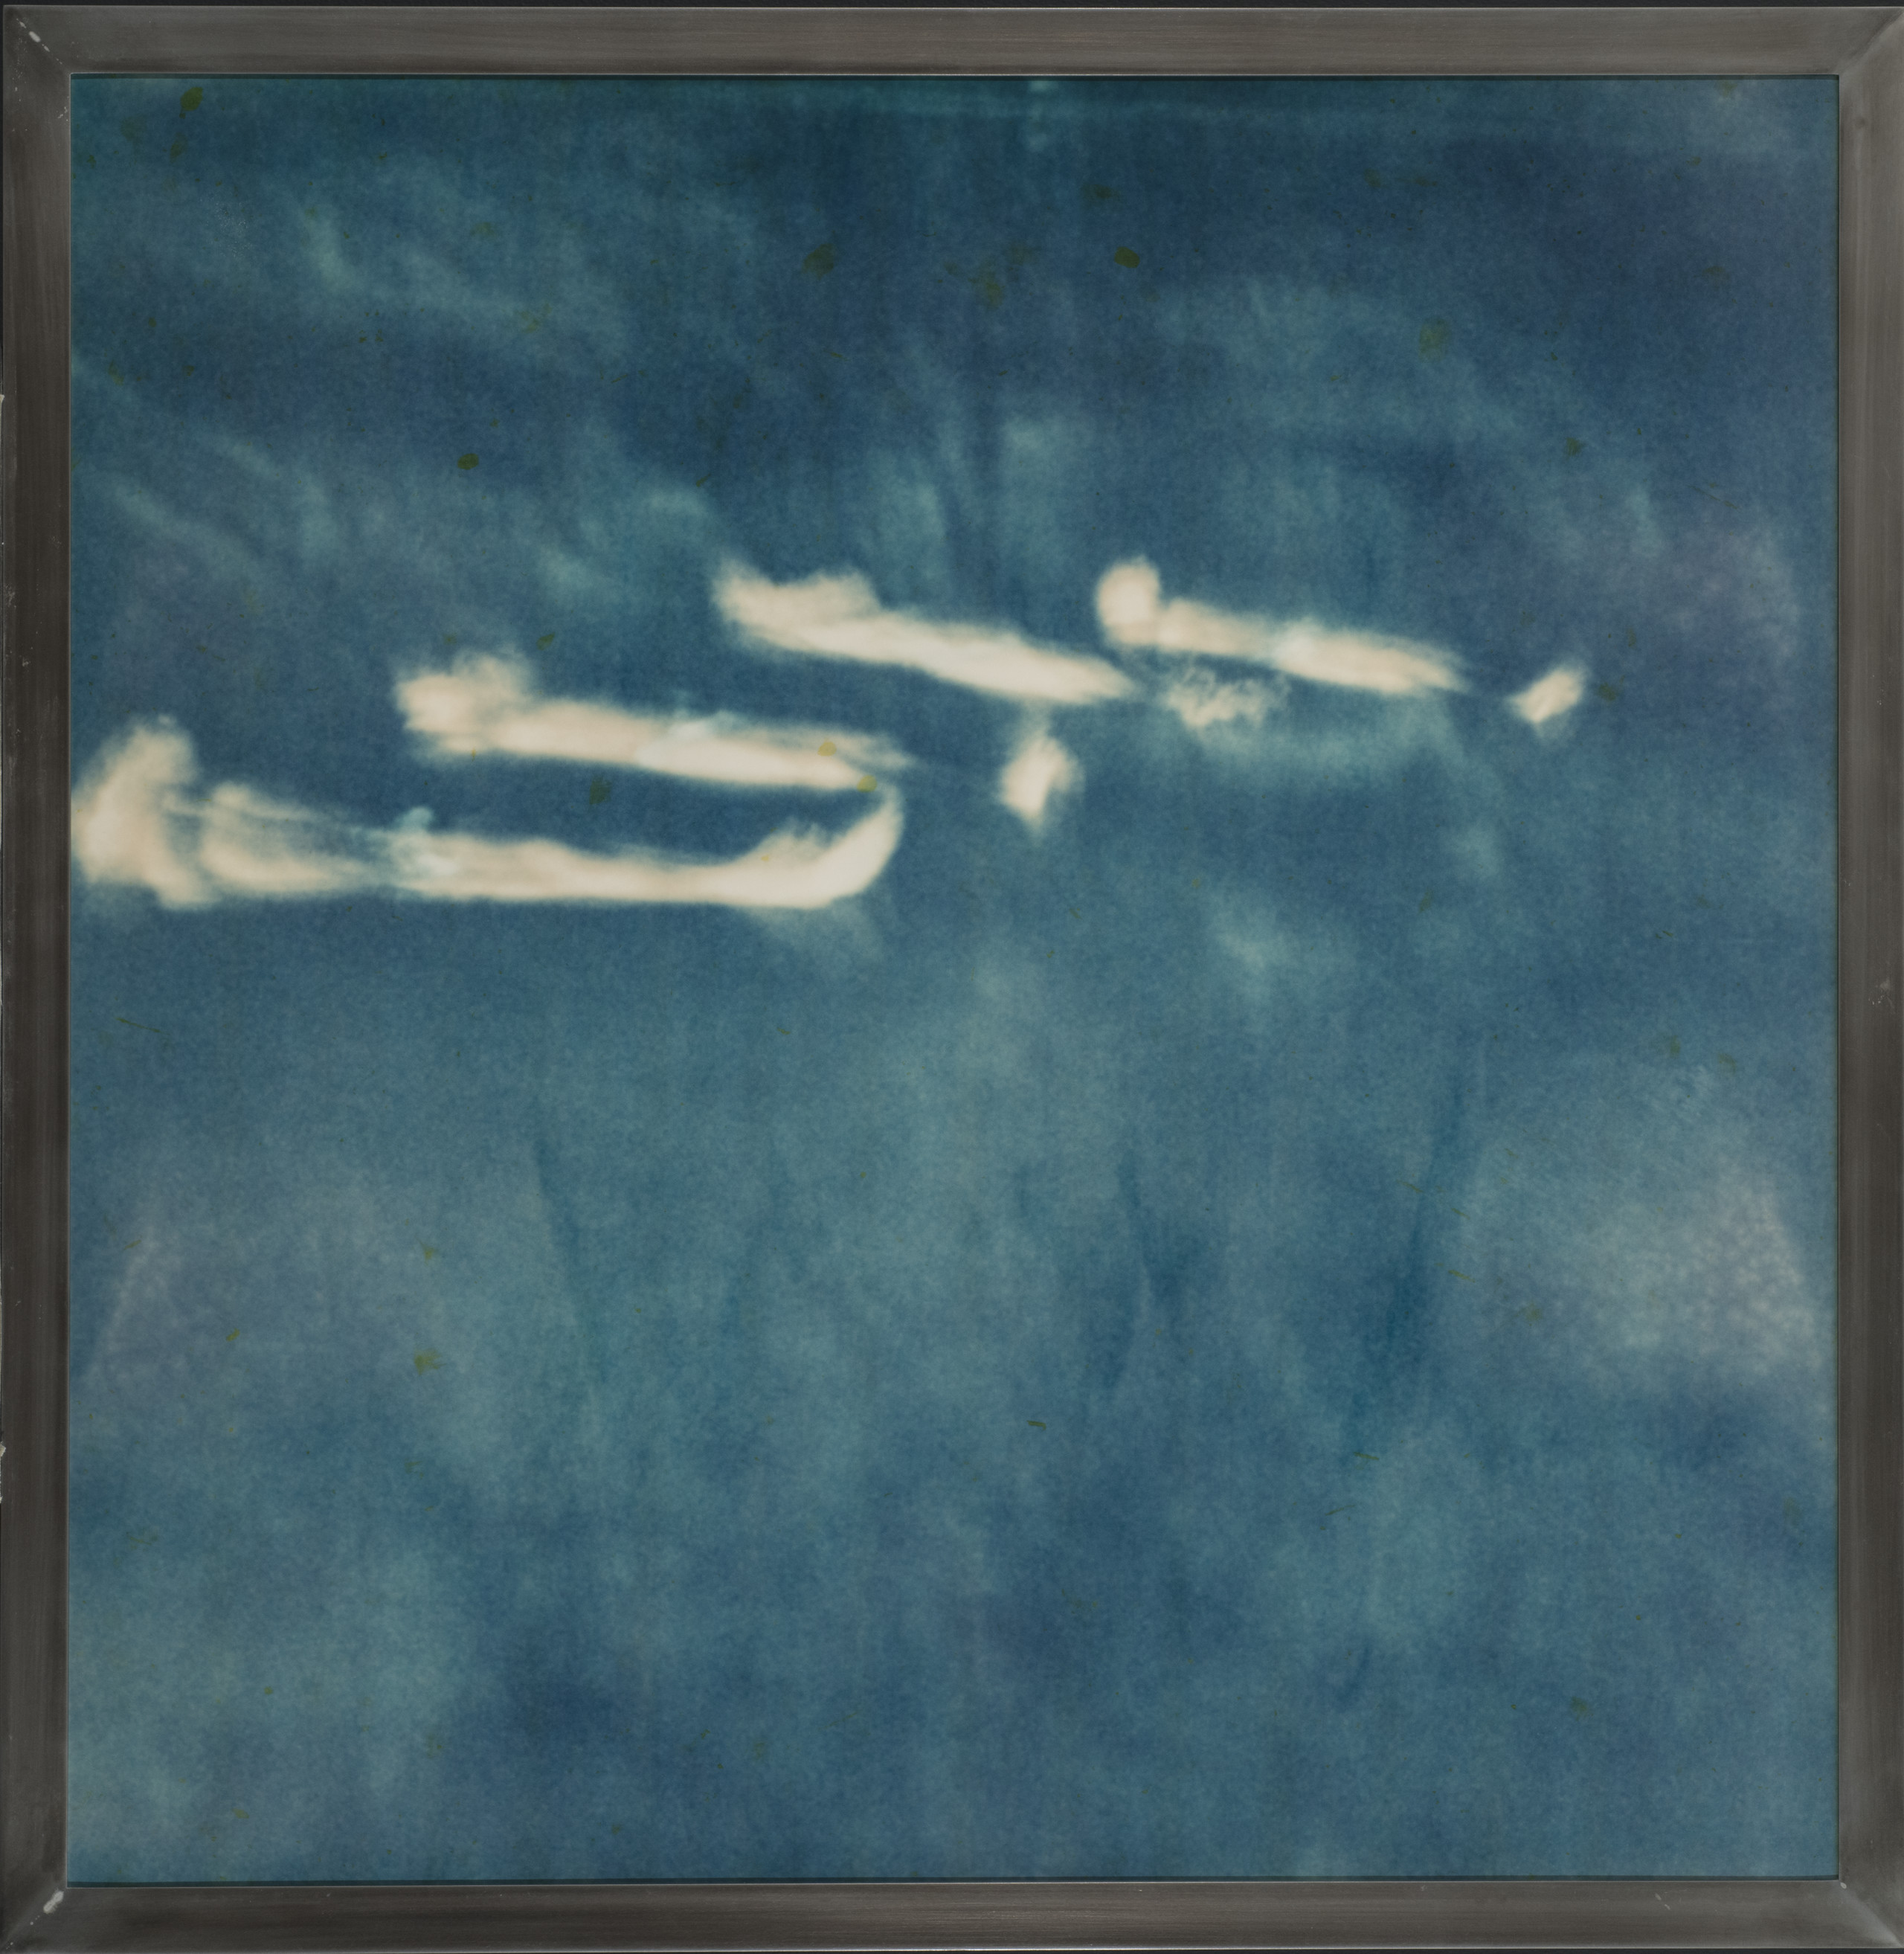 Four long, white, cloudy-looking wisps against a cyan navy background.